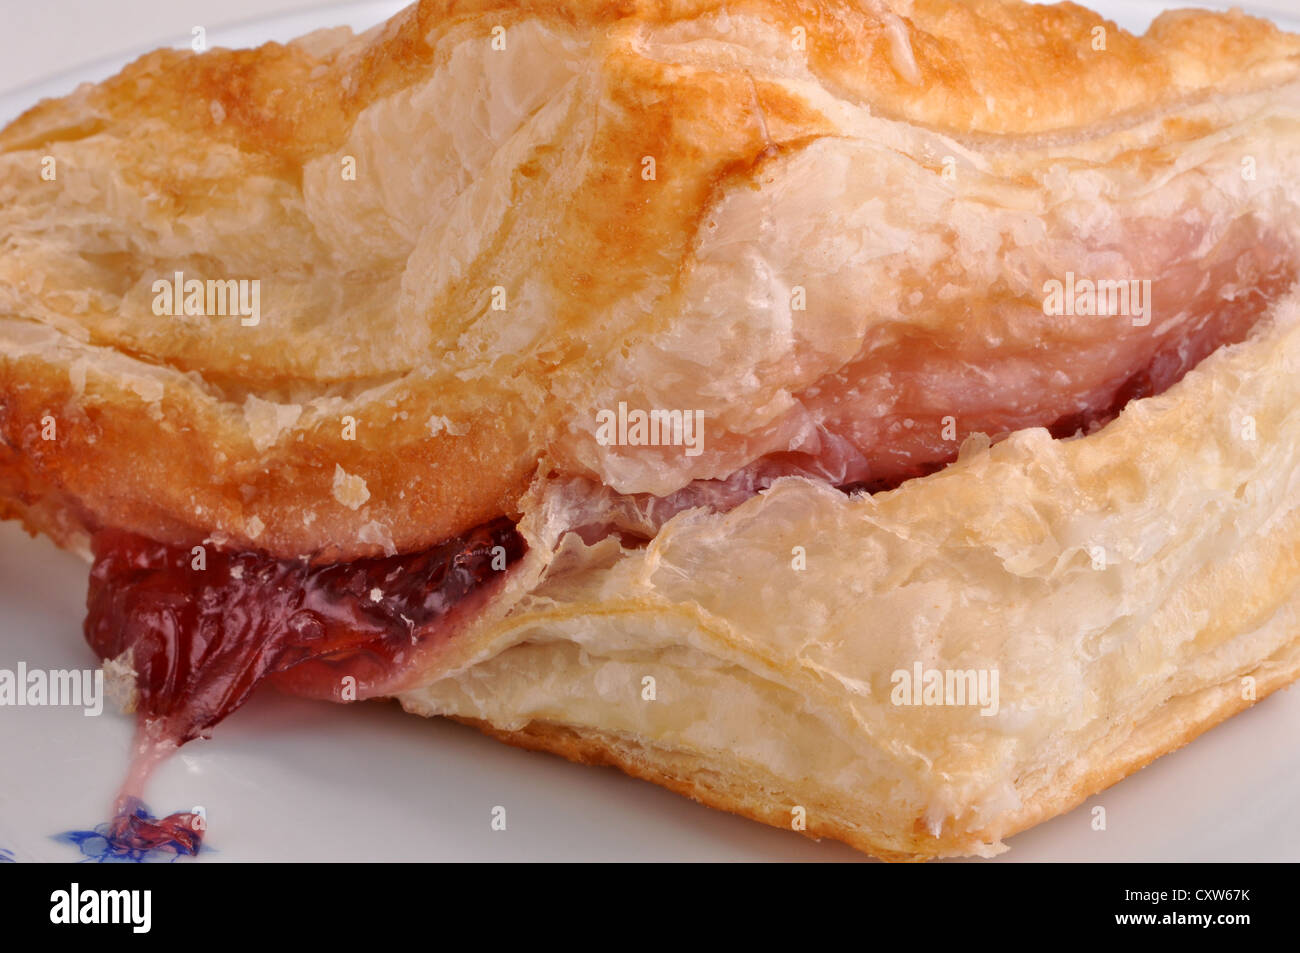 A closeup view of a cherry turnover on a saucer Stock Photo